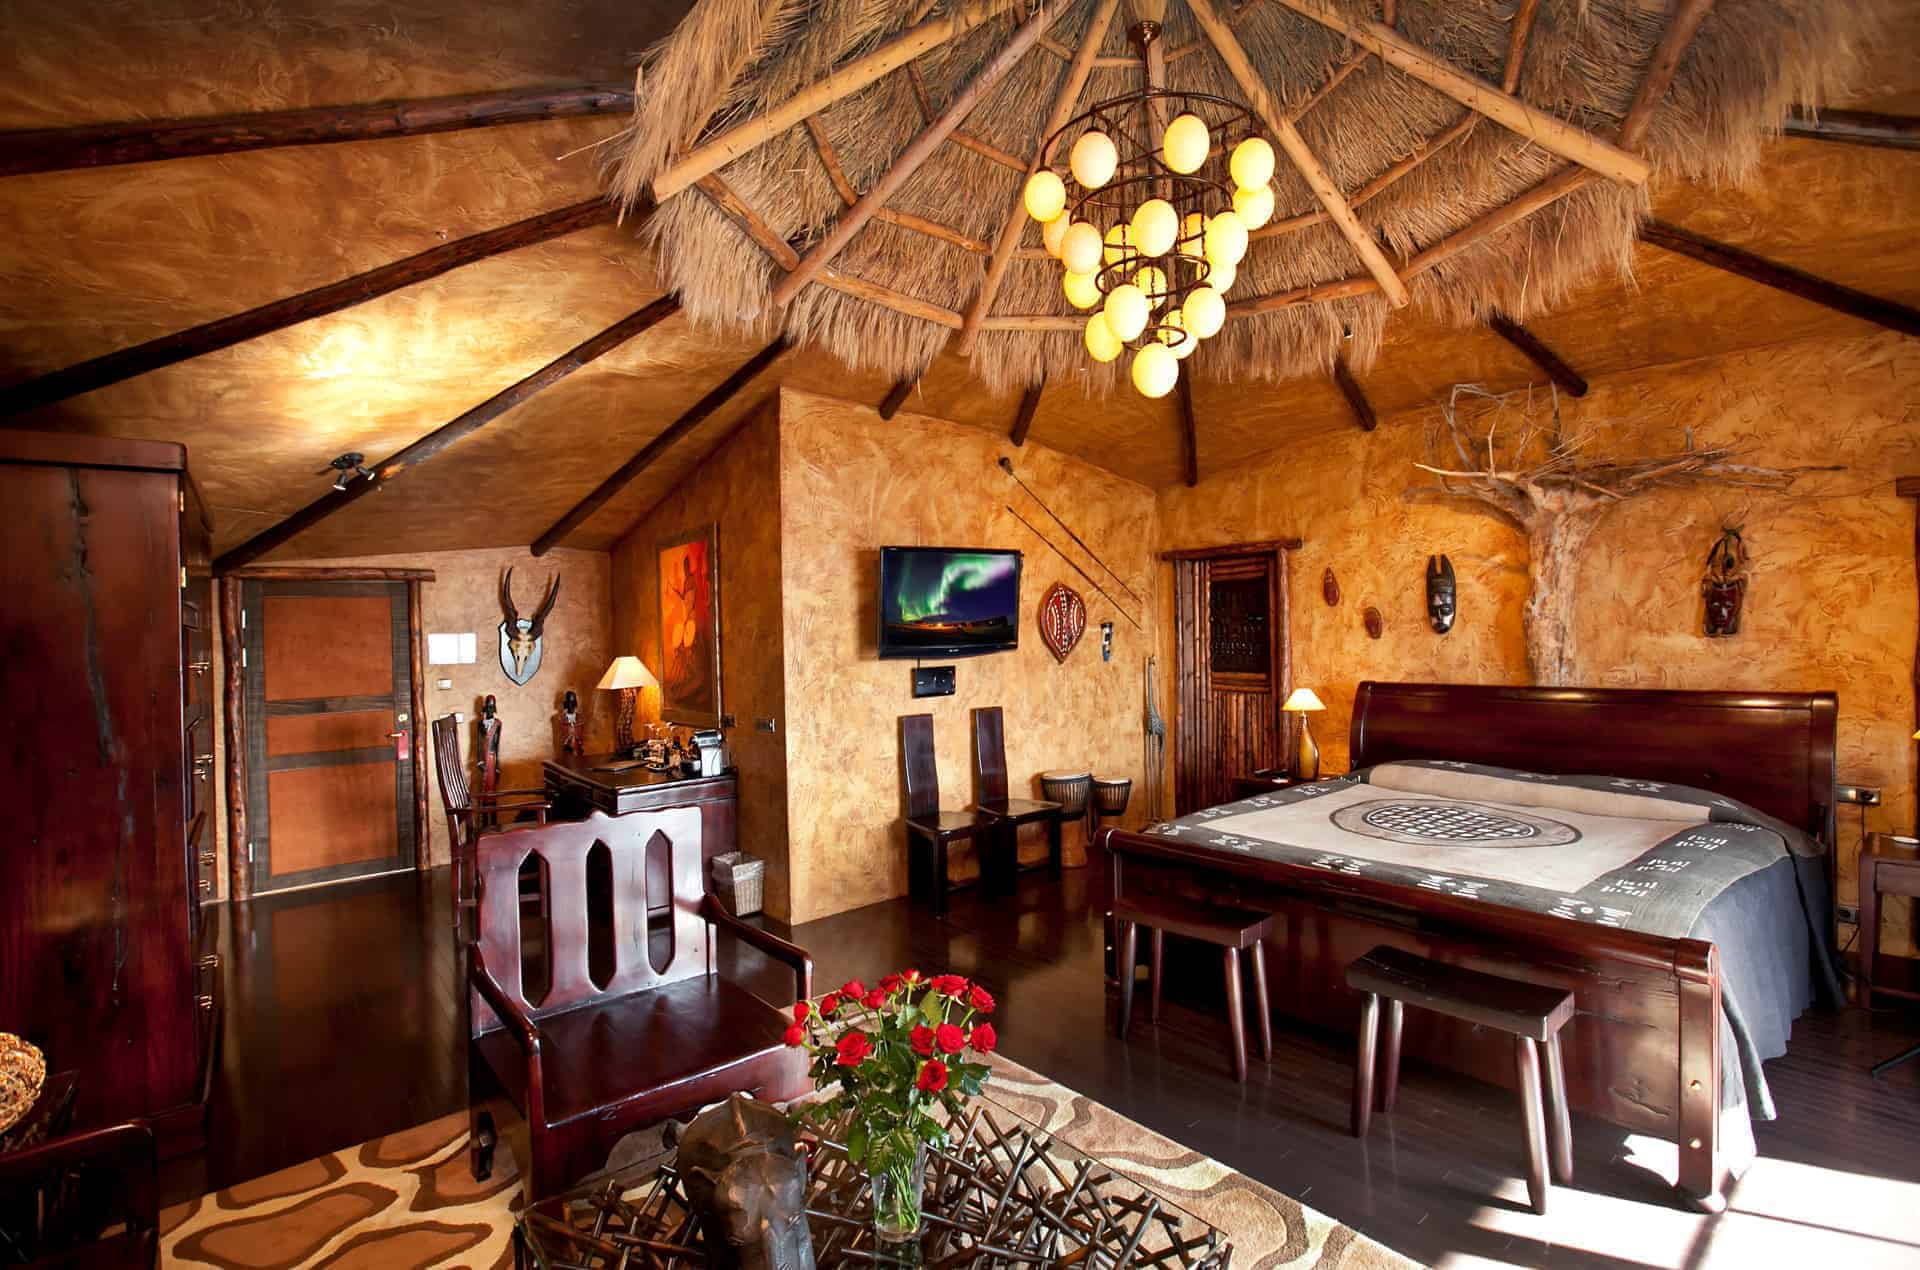 Hotel Rangá's Africa Master Suite decorated with a grass ceiling to resemble a traditional dwelling.